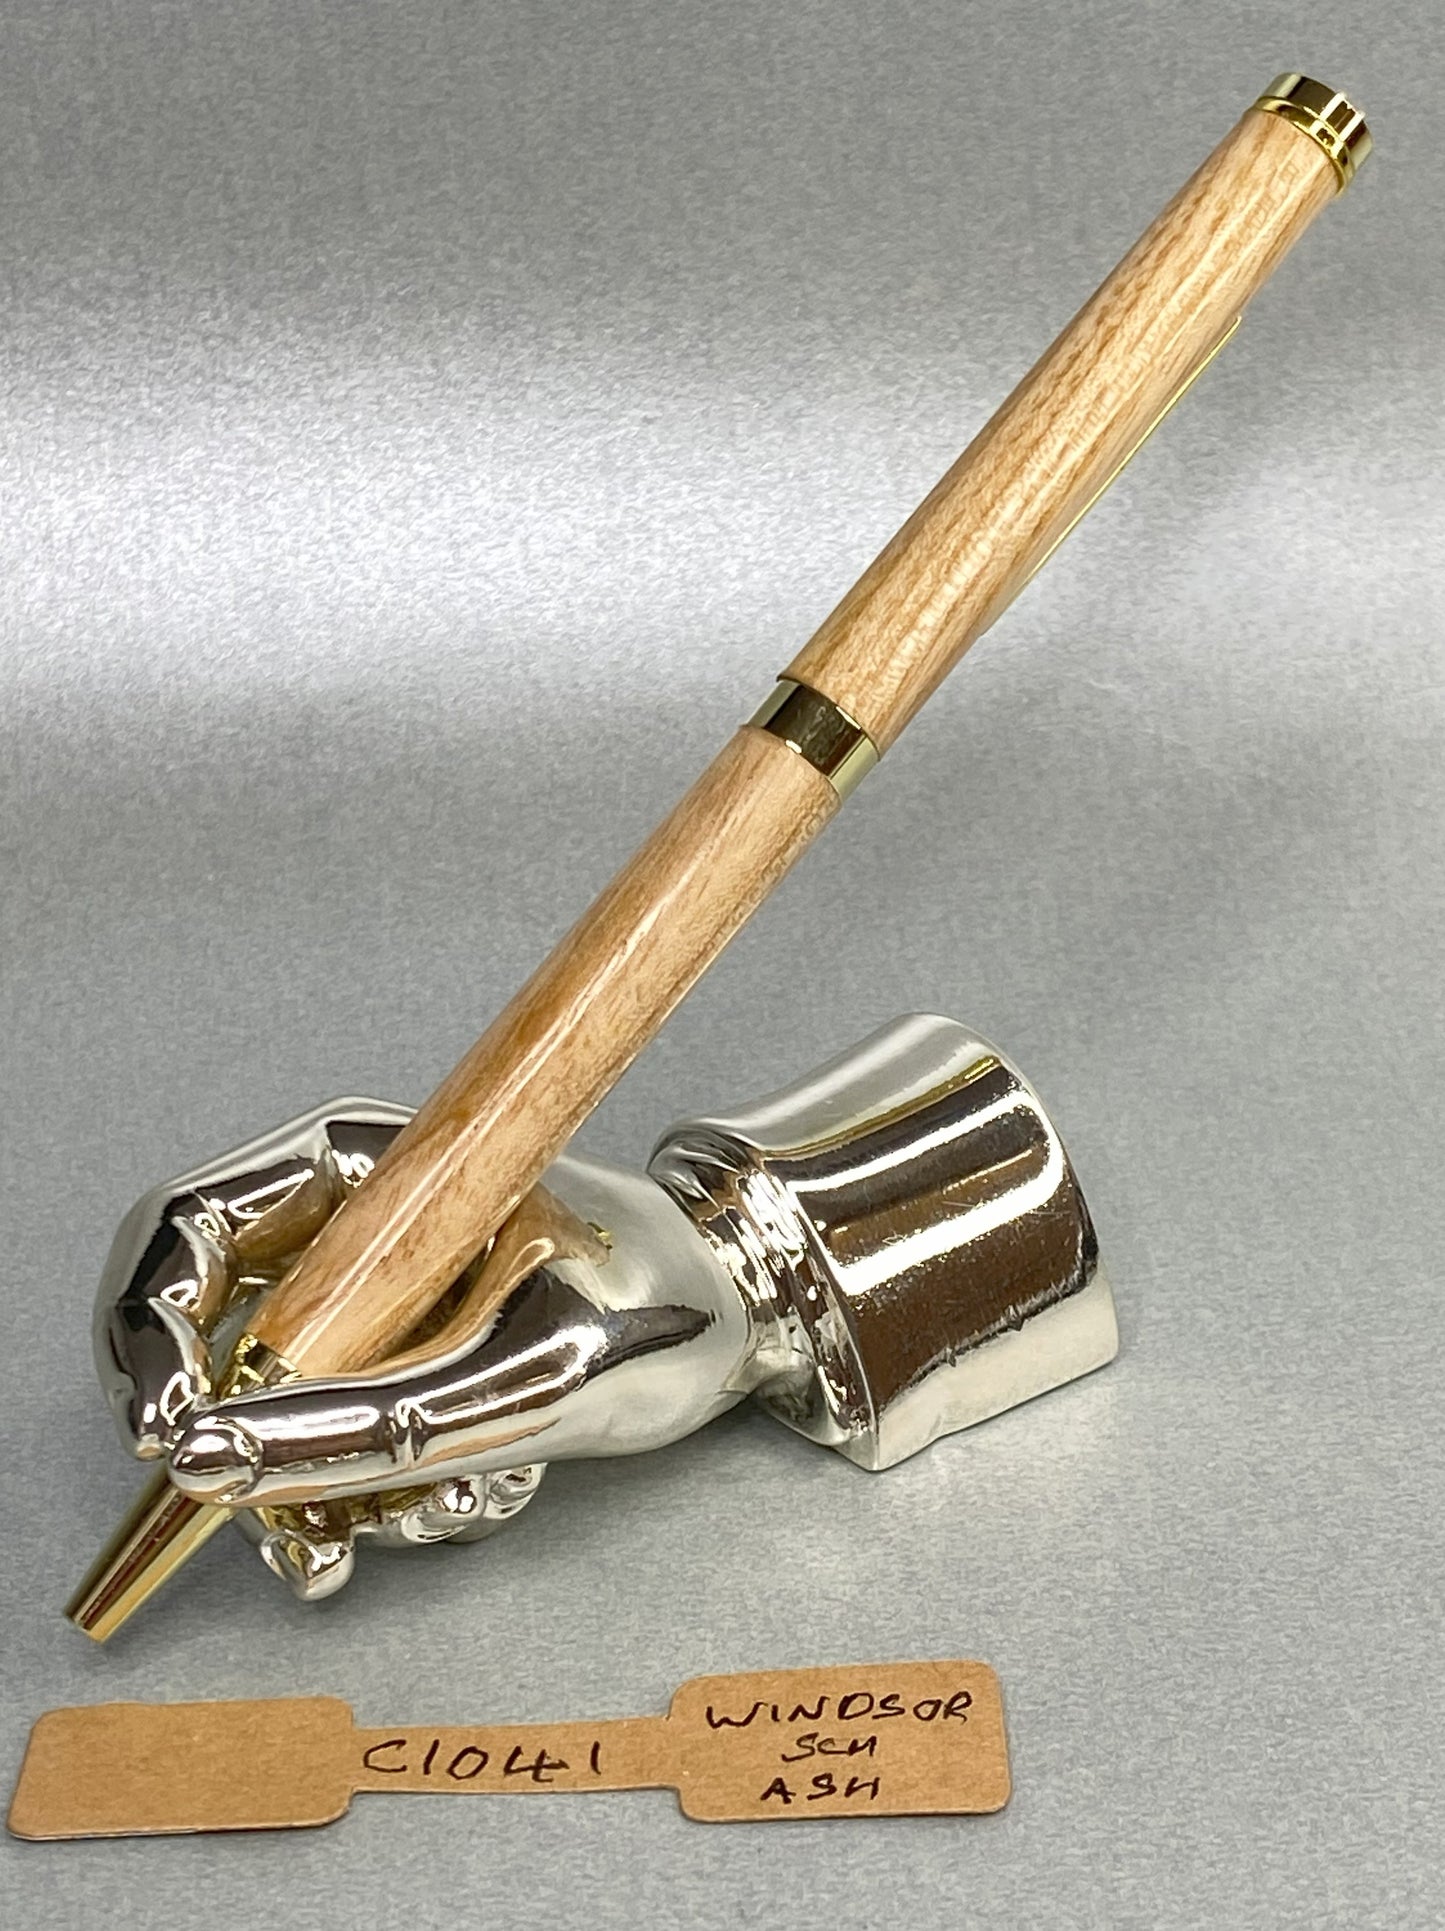 Ash wood with gold plated fittings and a cricket bat clip on a chrome plated stand in the shape of a hand